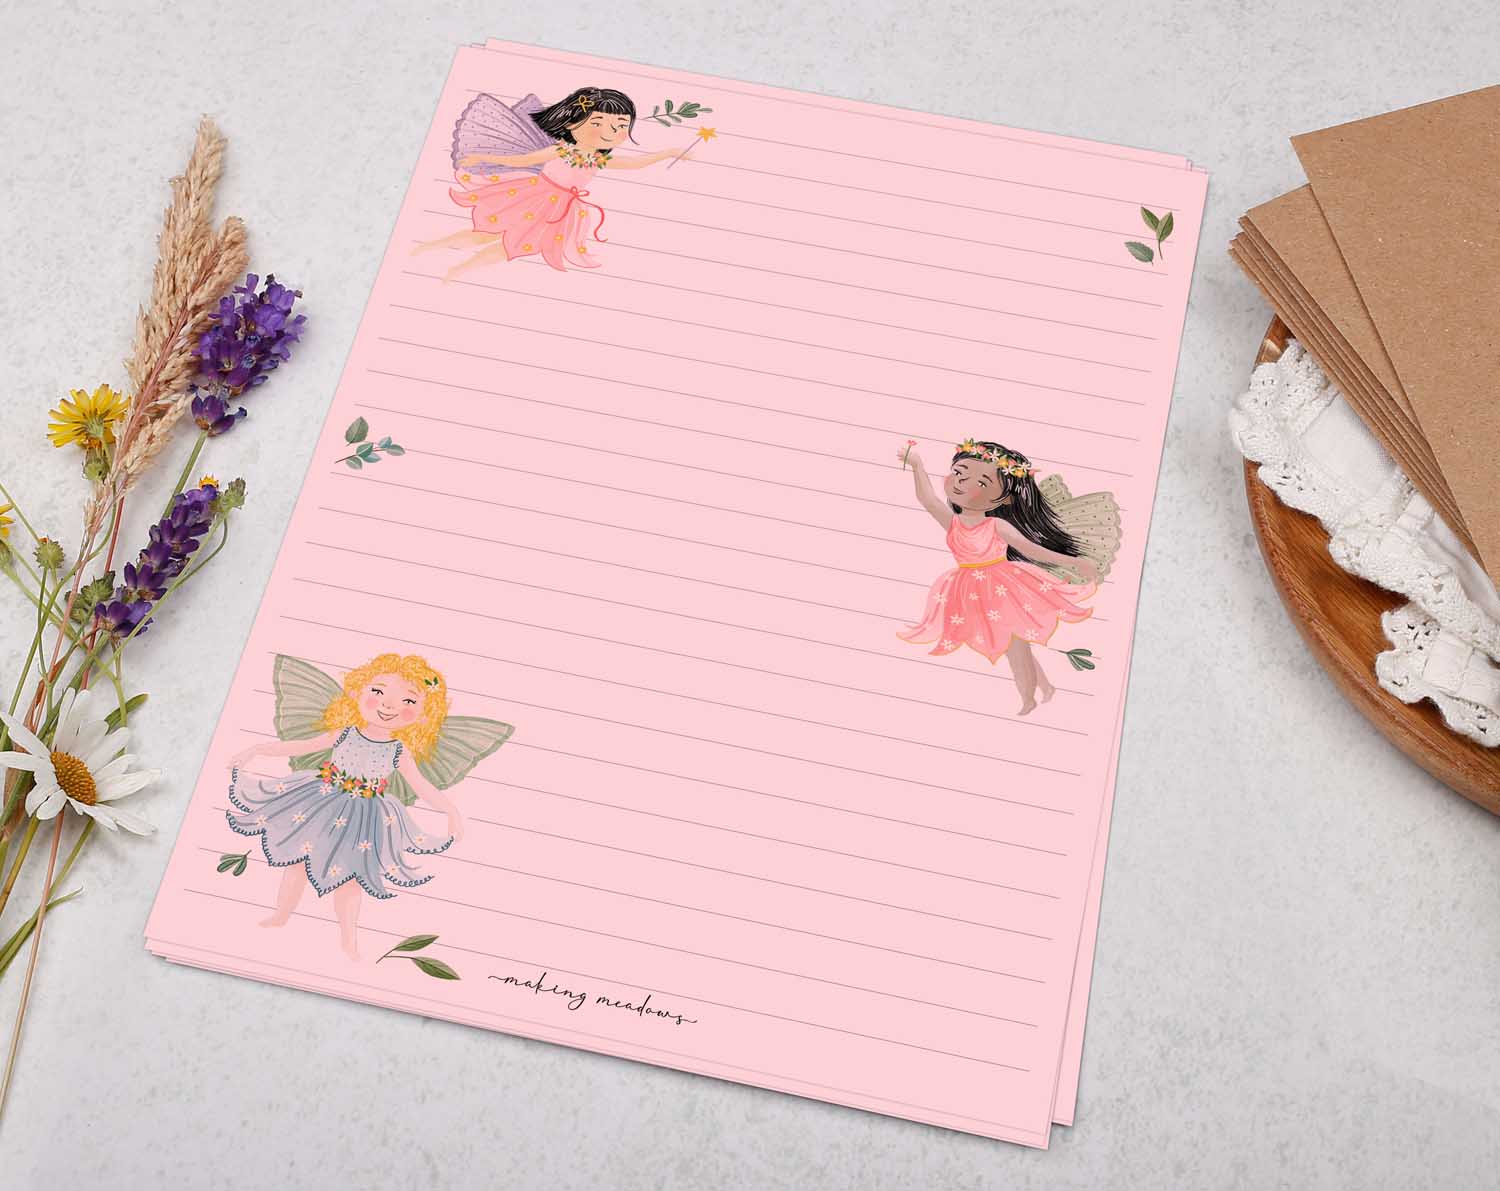 Pink A5 letter writing paper sheets with cute garden fairy design.